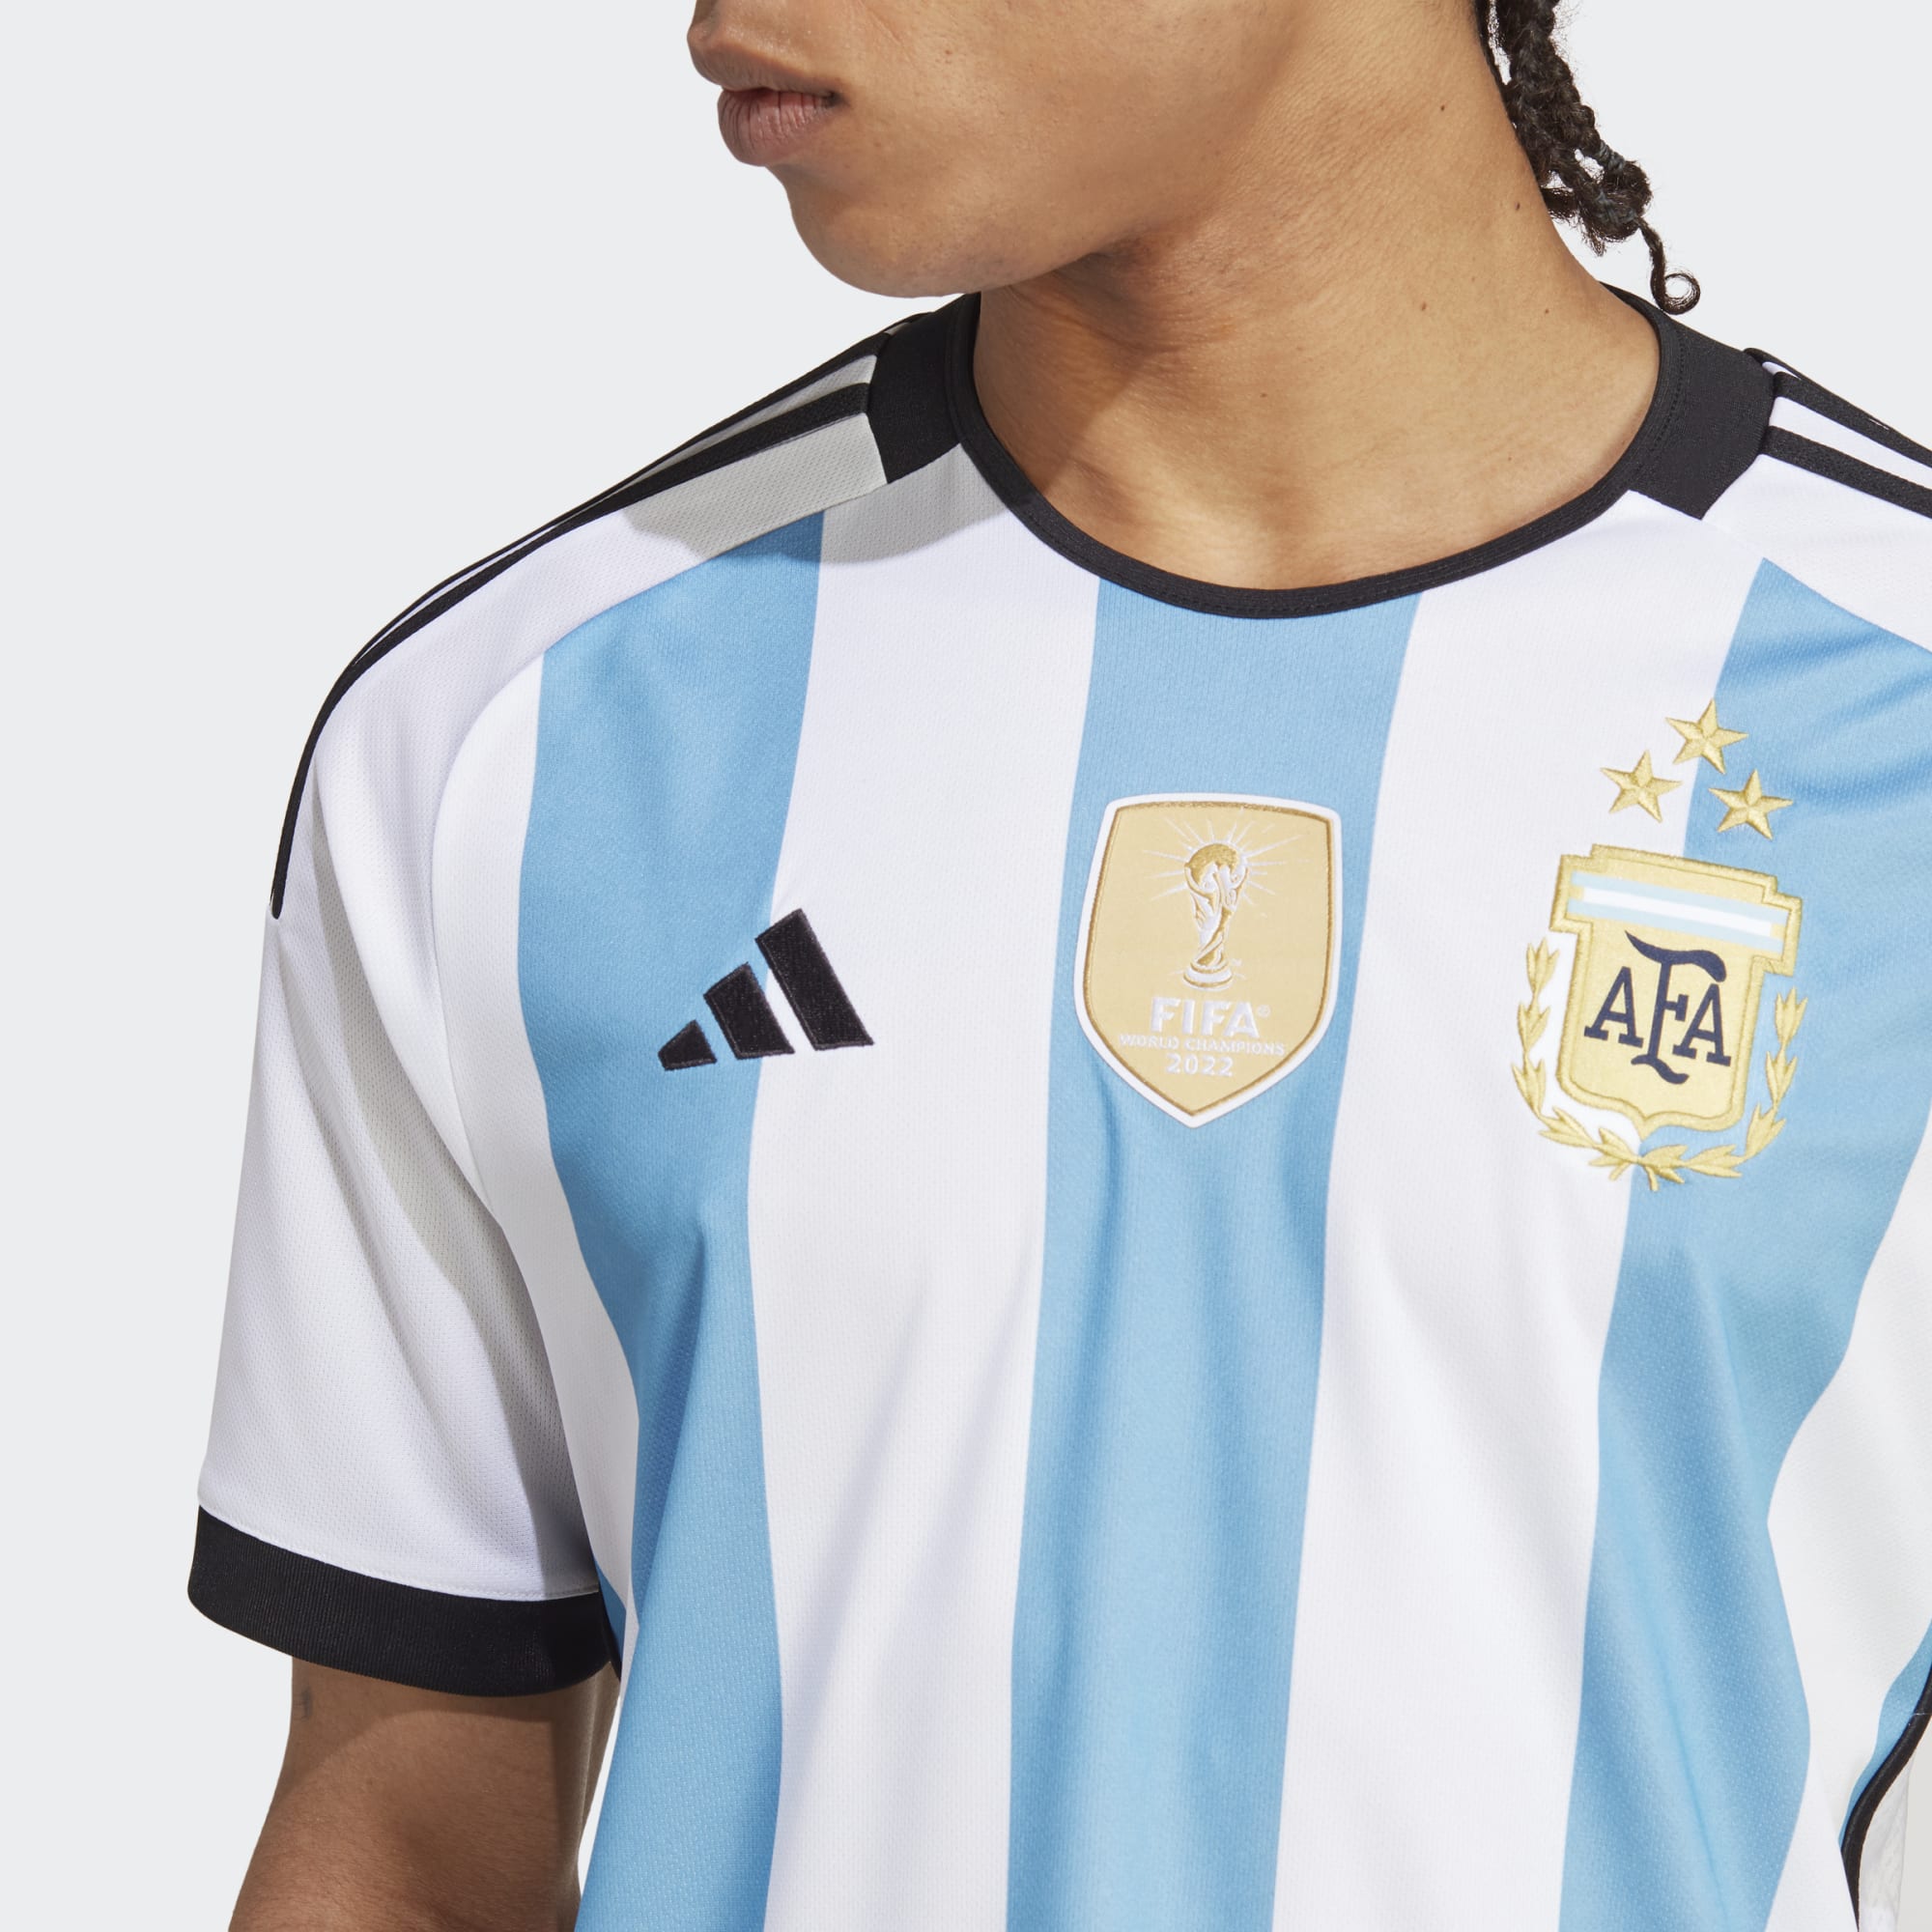 world cup jersey 2022 argentina